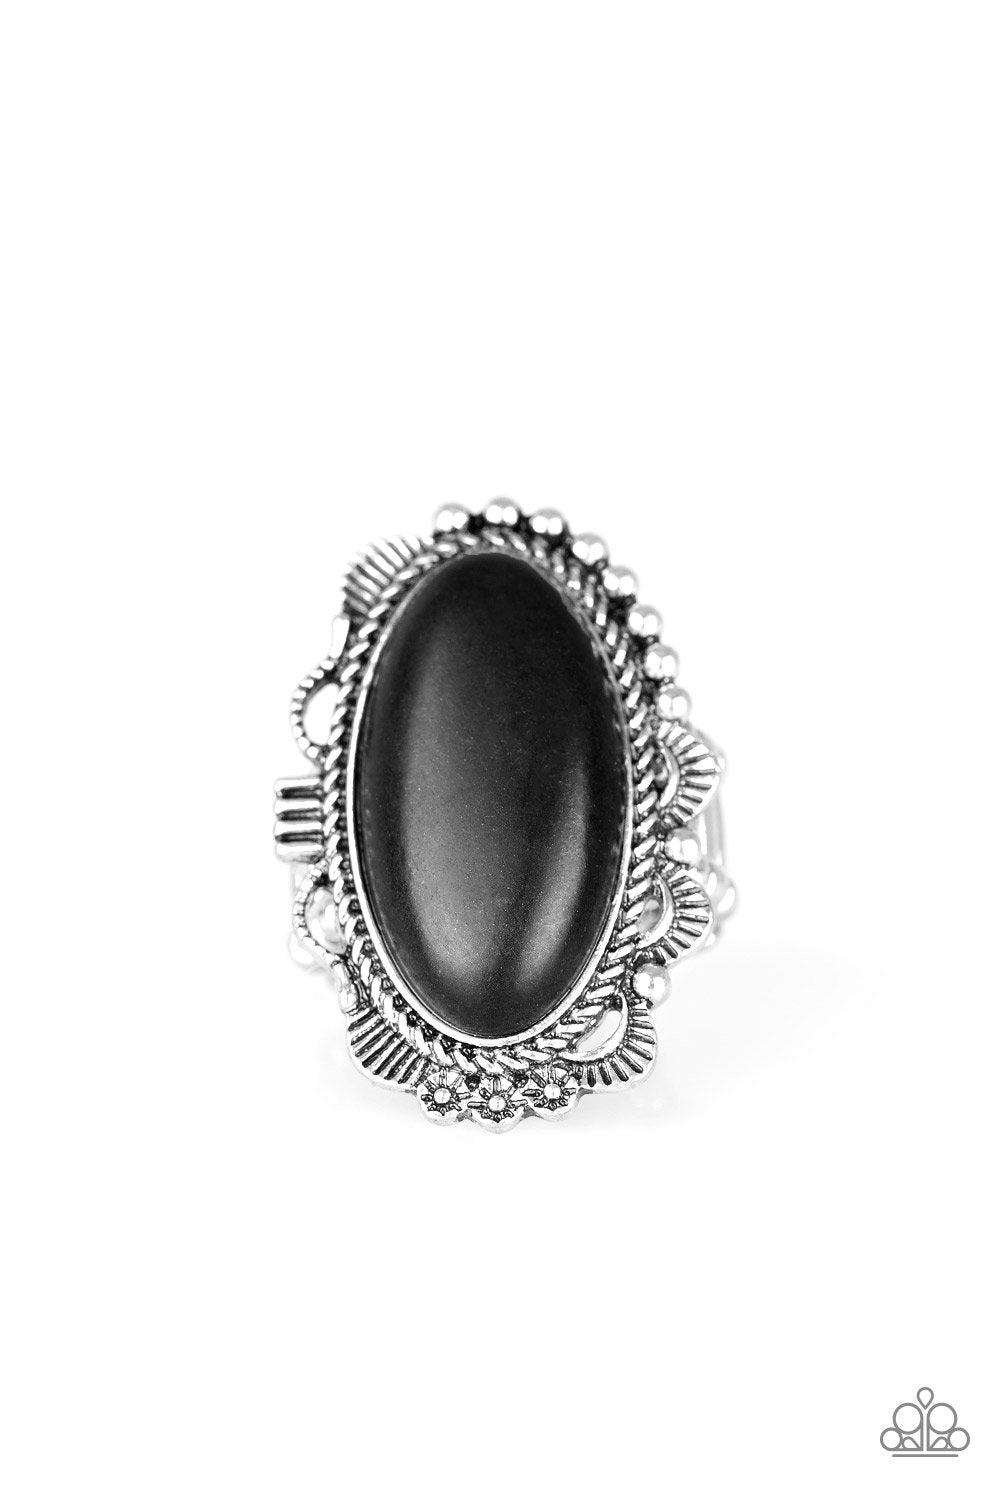 Open Range Black Stone and Silver Ring - Paparazzi Accessories - lightbox -CarasShop.com - $5 Jewelry by Cara Jewels